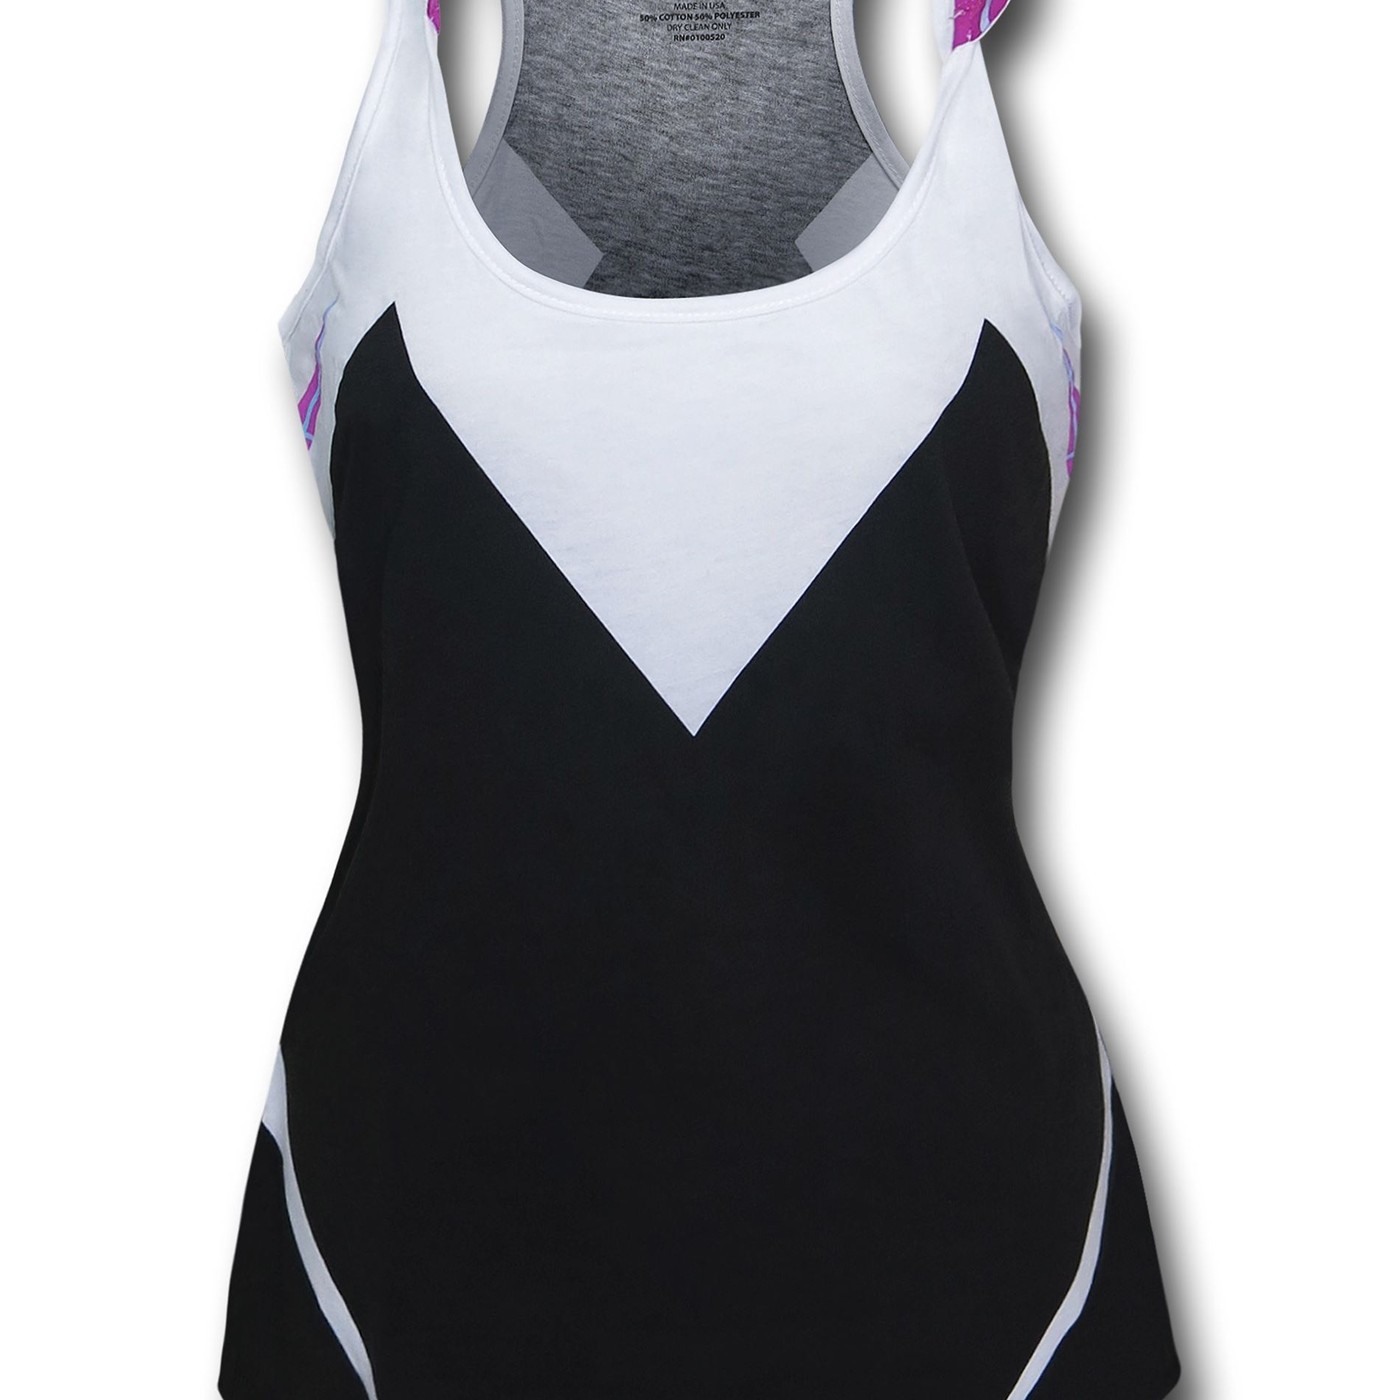 Spider Gwen Hooded Costume Tank Top